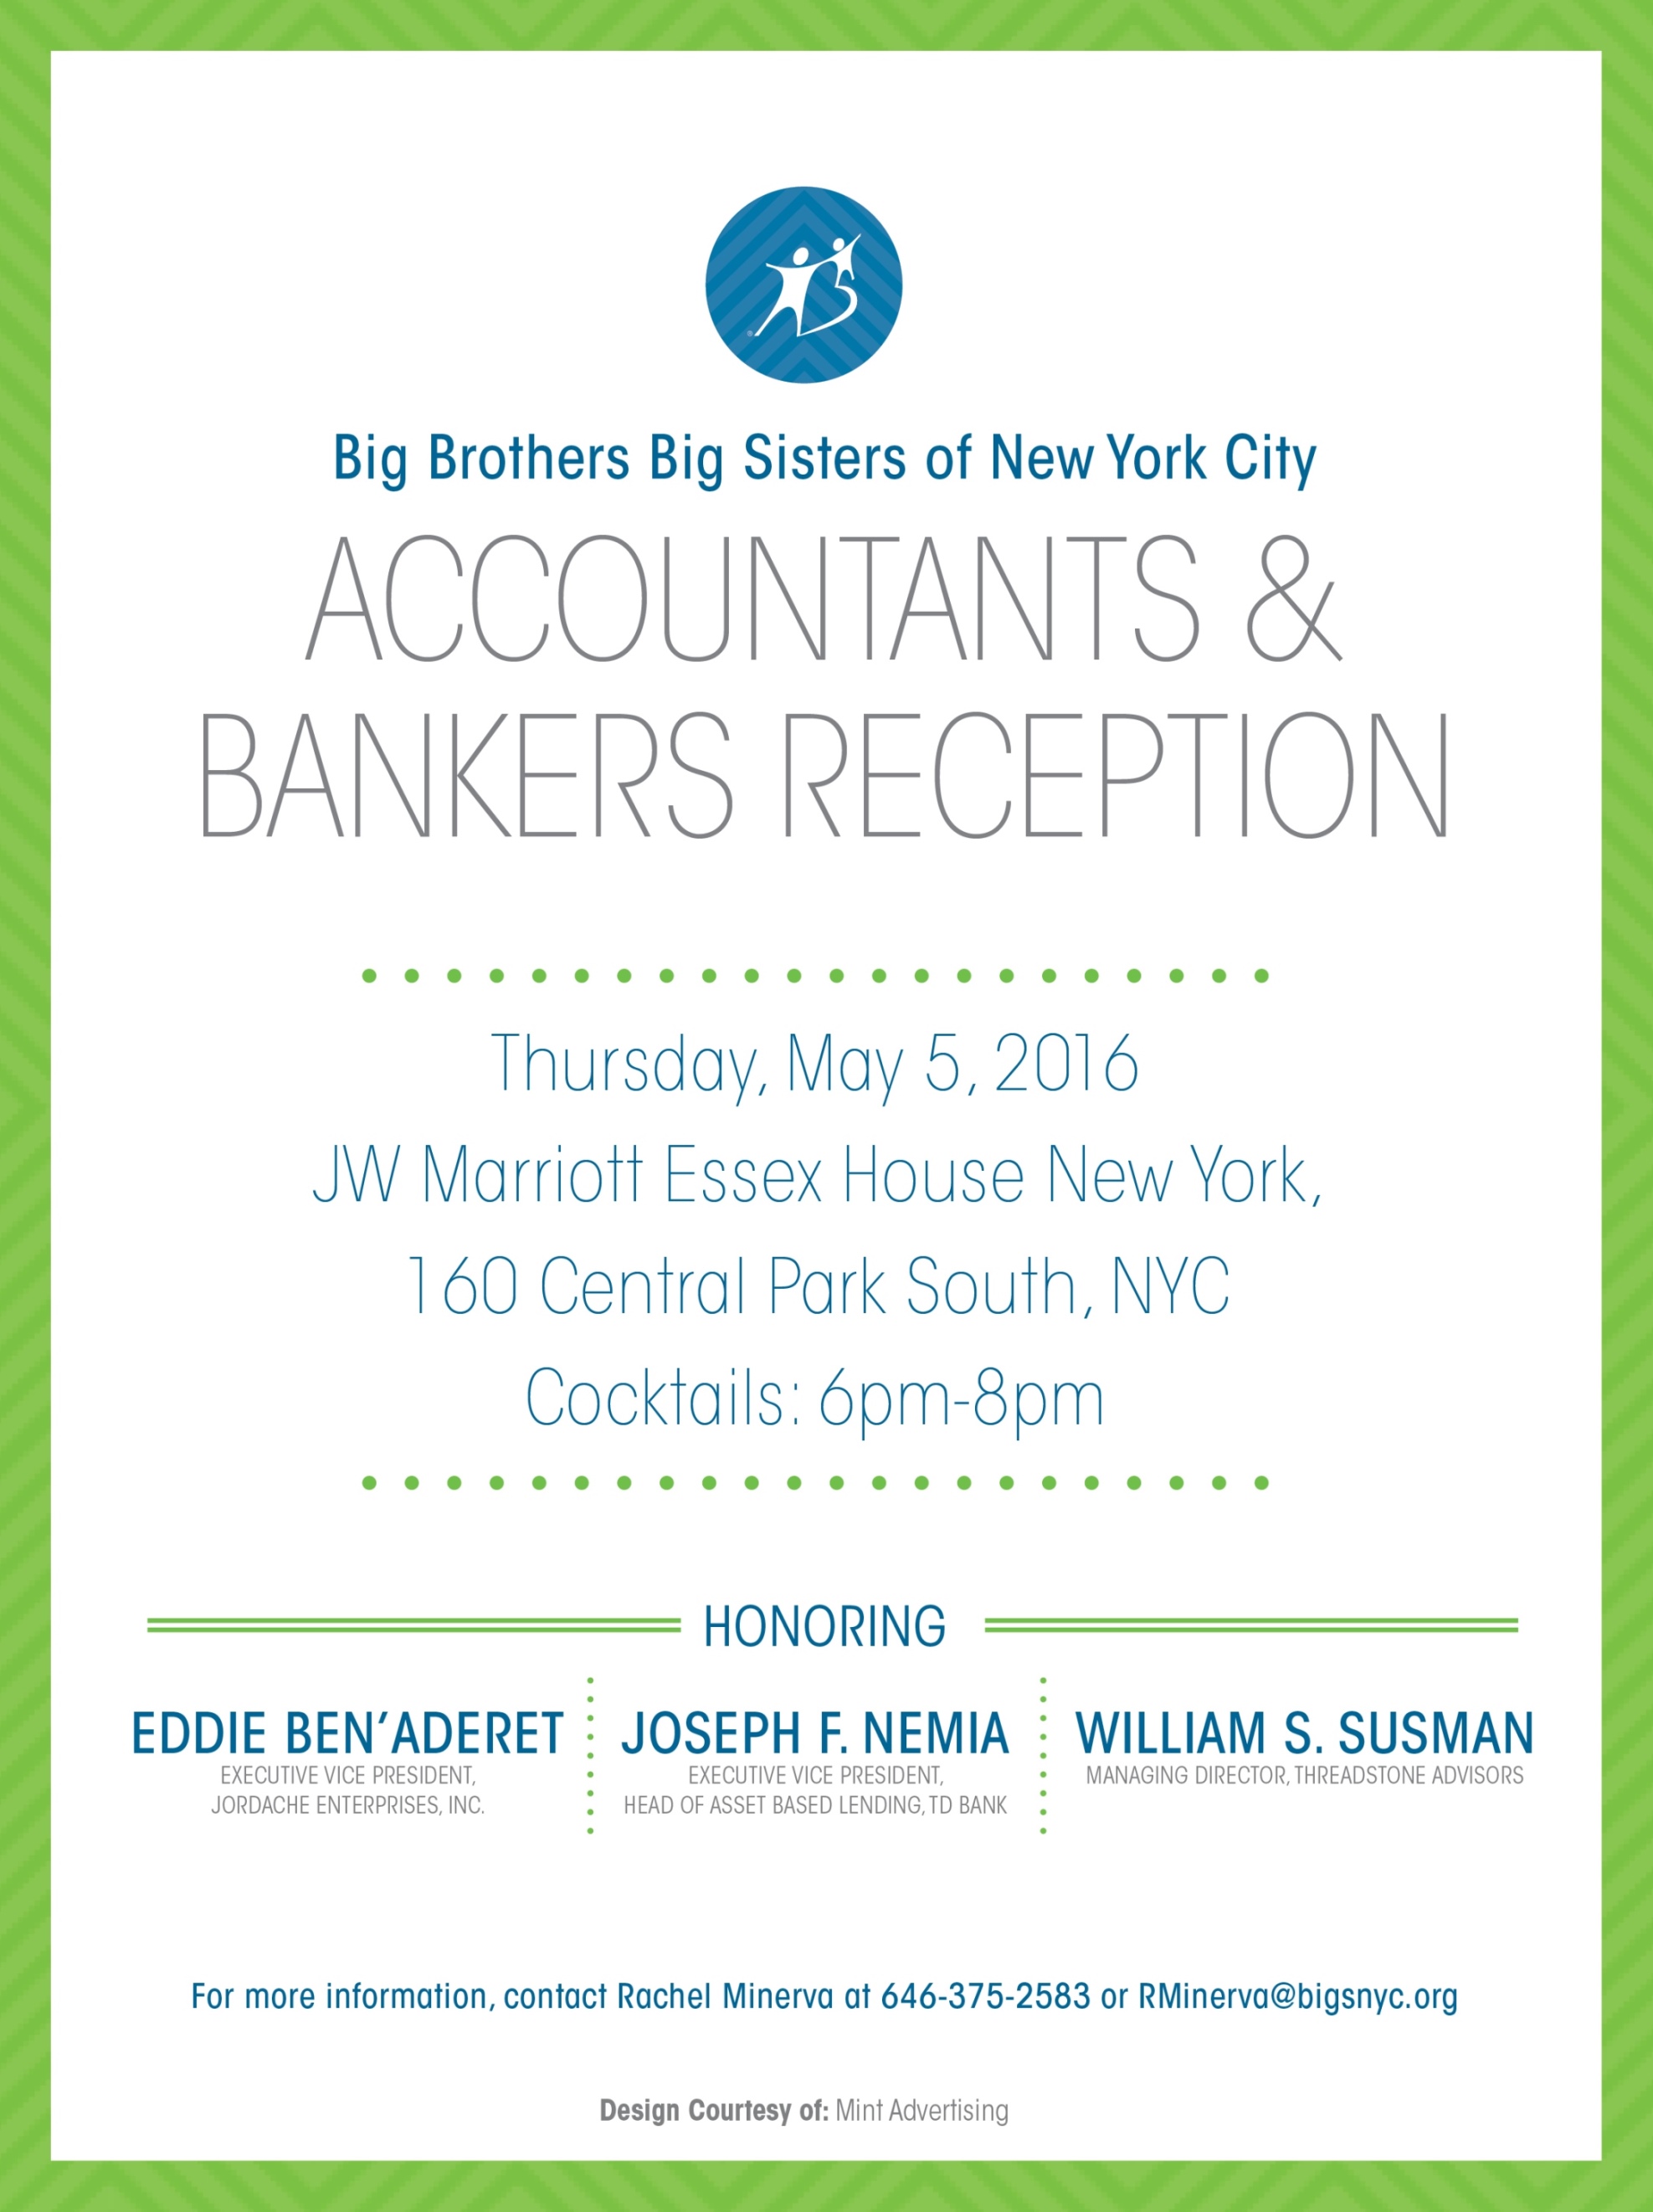 2016 Accountants & Bankers Save the Date_1.jpg